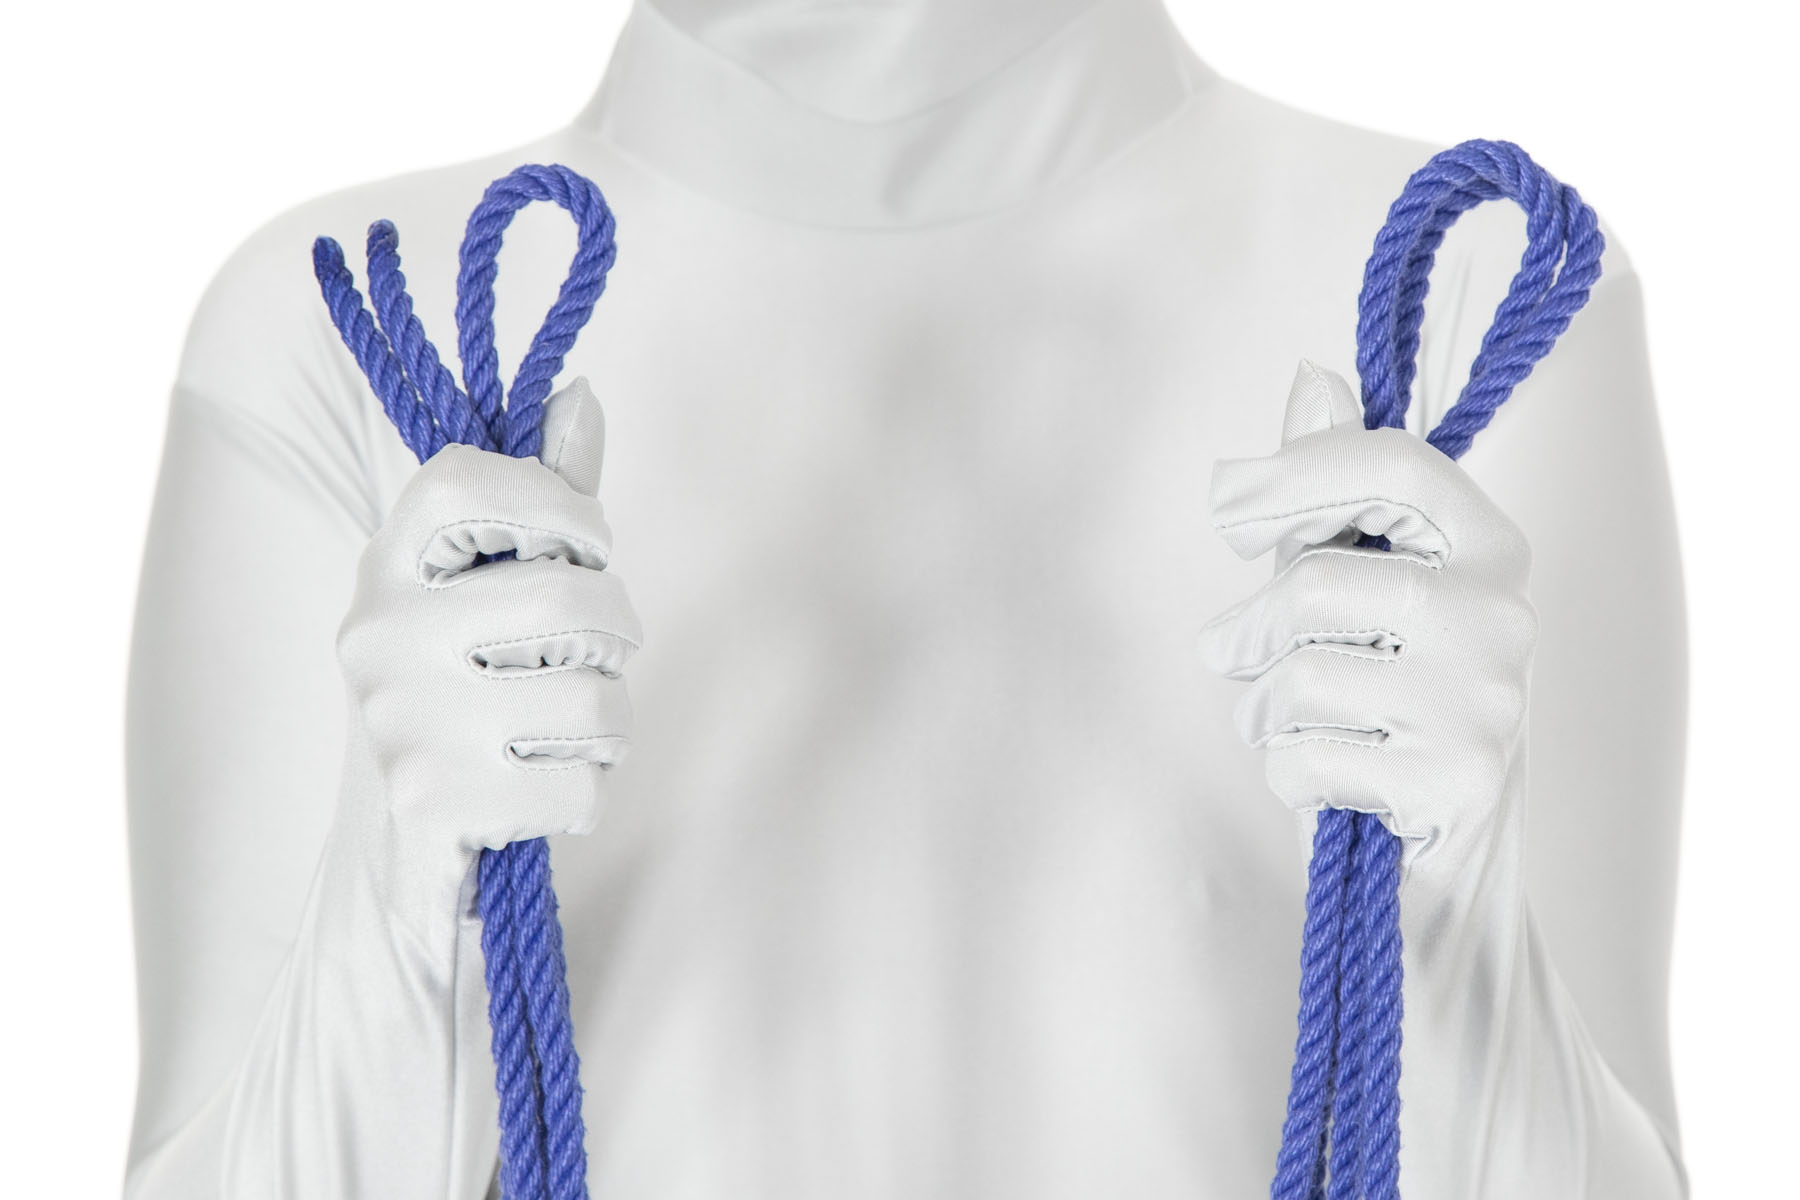 A person holding two ends of a blue rope and the doubled center of the rope in their right hand and two doubled rope centers in their left hand.